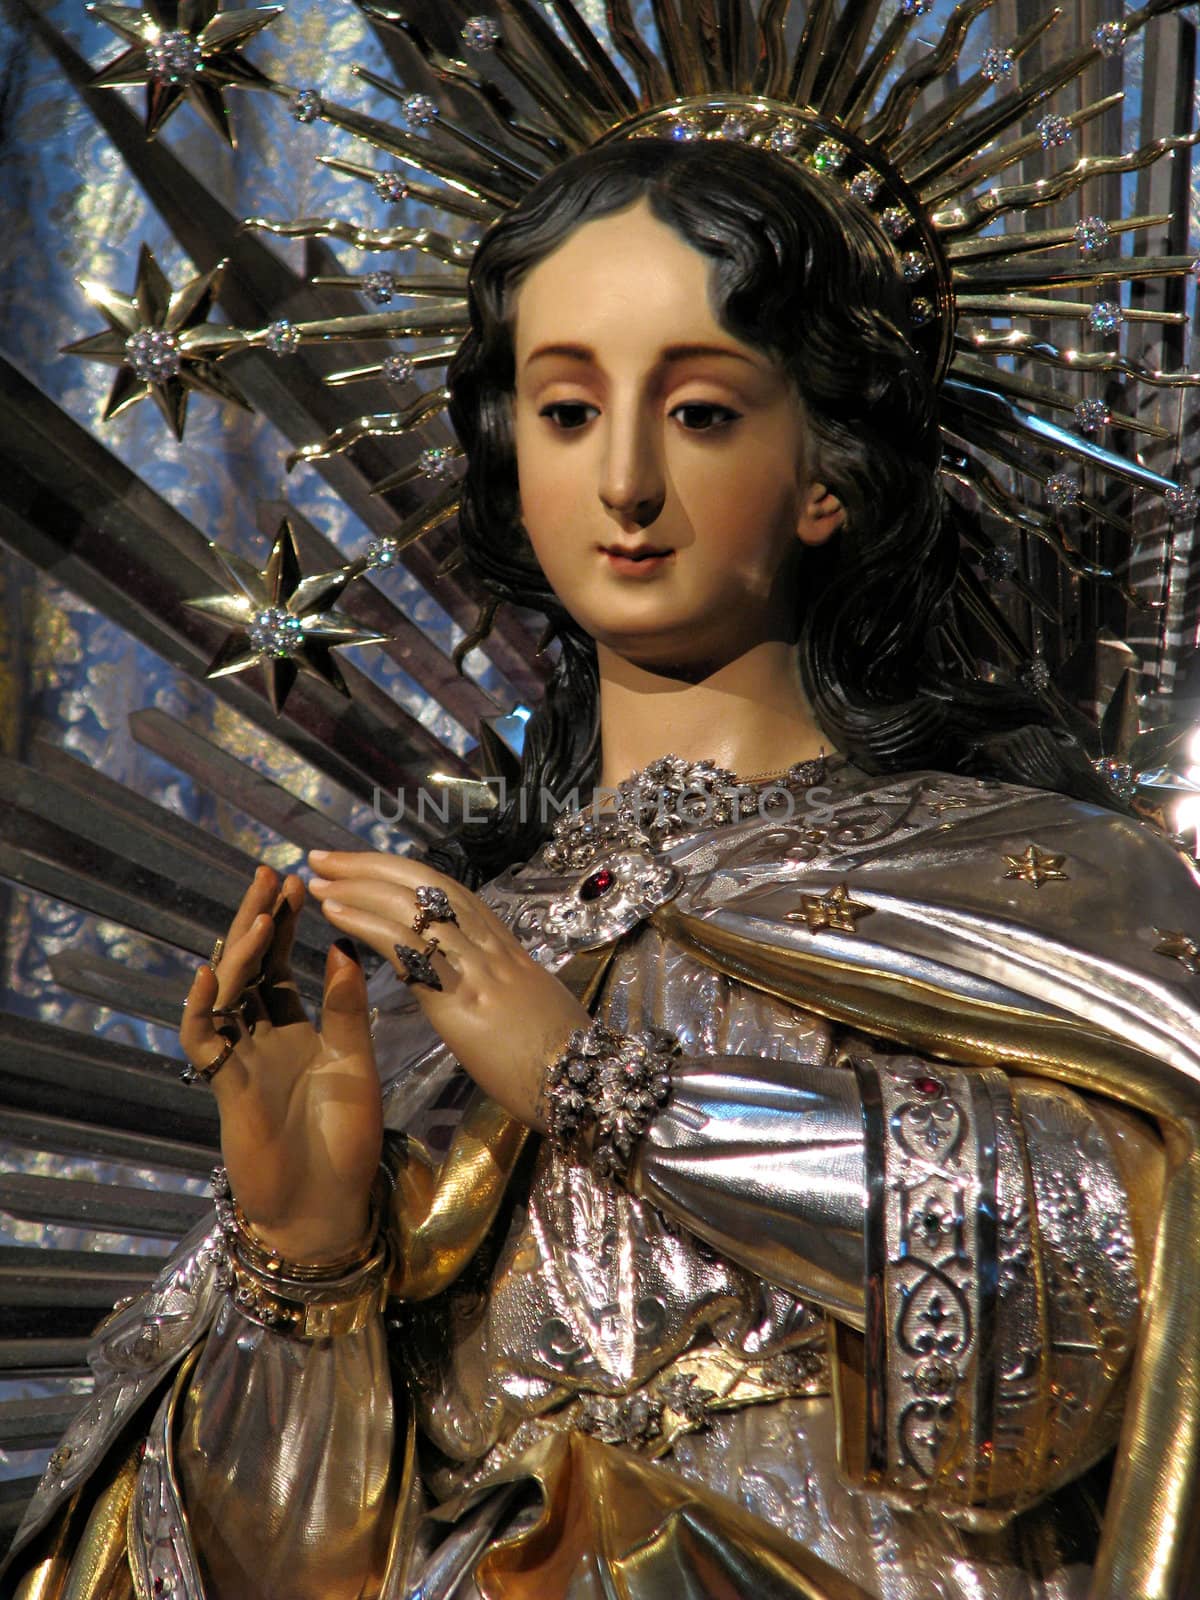 A detail of the beautiful statue of The Immaculate Conception, venerated in the parish church of Cospicua, Malta.